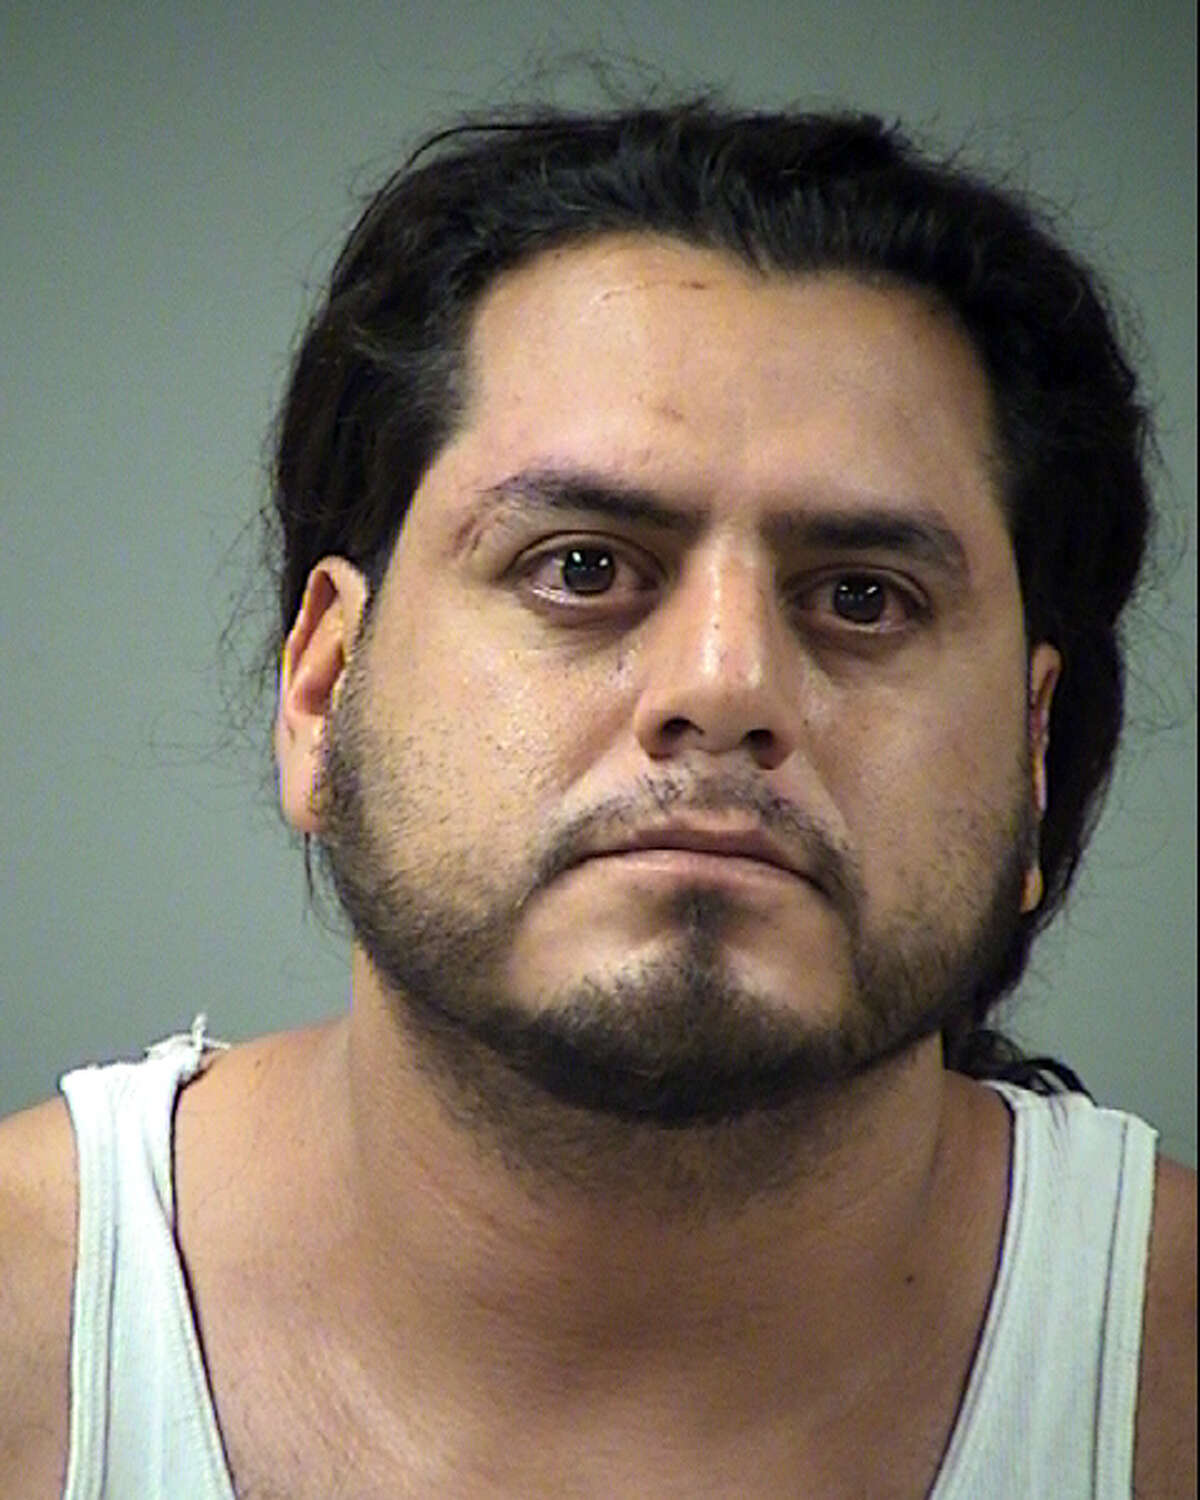 Manuel Rodriguez was charged with driving while intoxicated on Sept. 22, 2018.